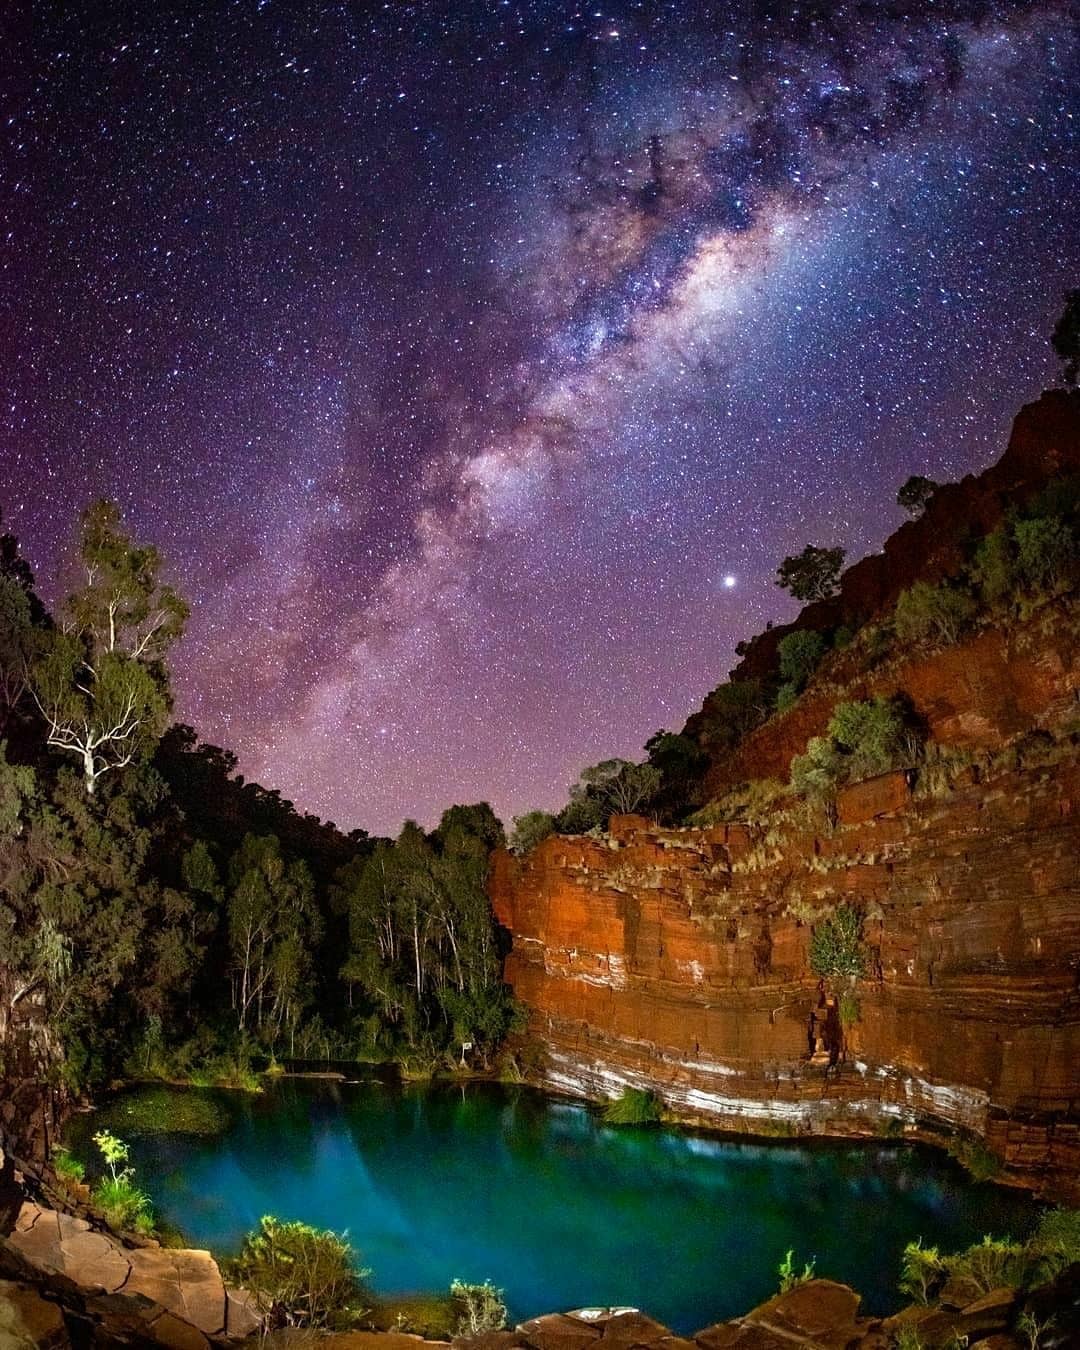 Outback treat ▶Reposted from @australiasnorthwest 🌟We reckon the starlight sets off Karijini's ancient rocky tunnels, plunging gorges and crystal-clear waterways just perfectly, don't you?!
.
📷 @naomirosephoto with the magical nighttime capture
.
#australiasnorthwest #epicpilbara #NWbucketlist #wanderoutyonder #australia #westernaustralia #adventureawaits #seeaustralia #thisiswa